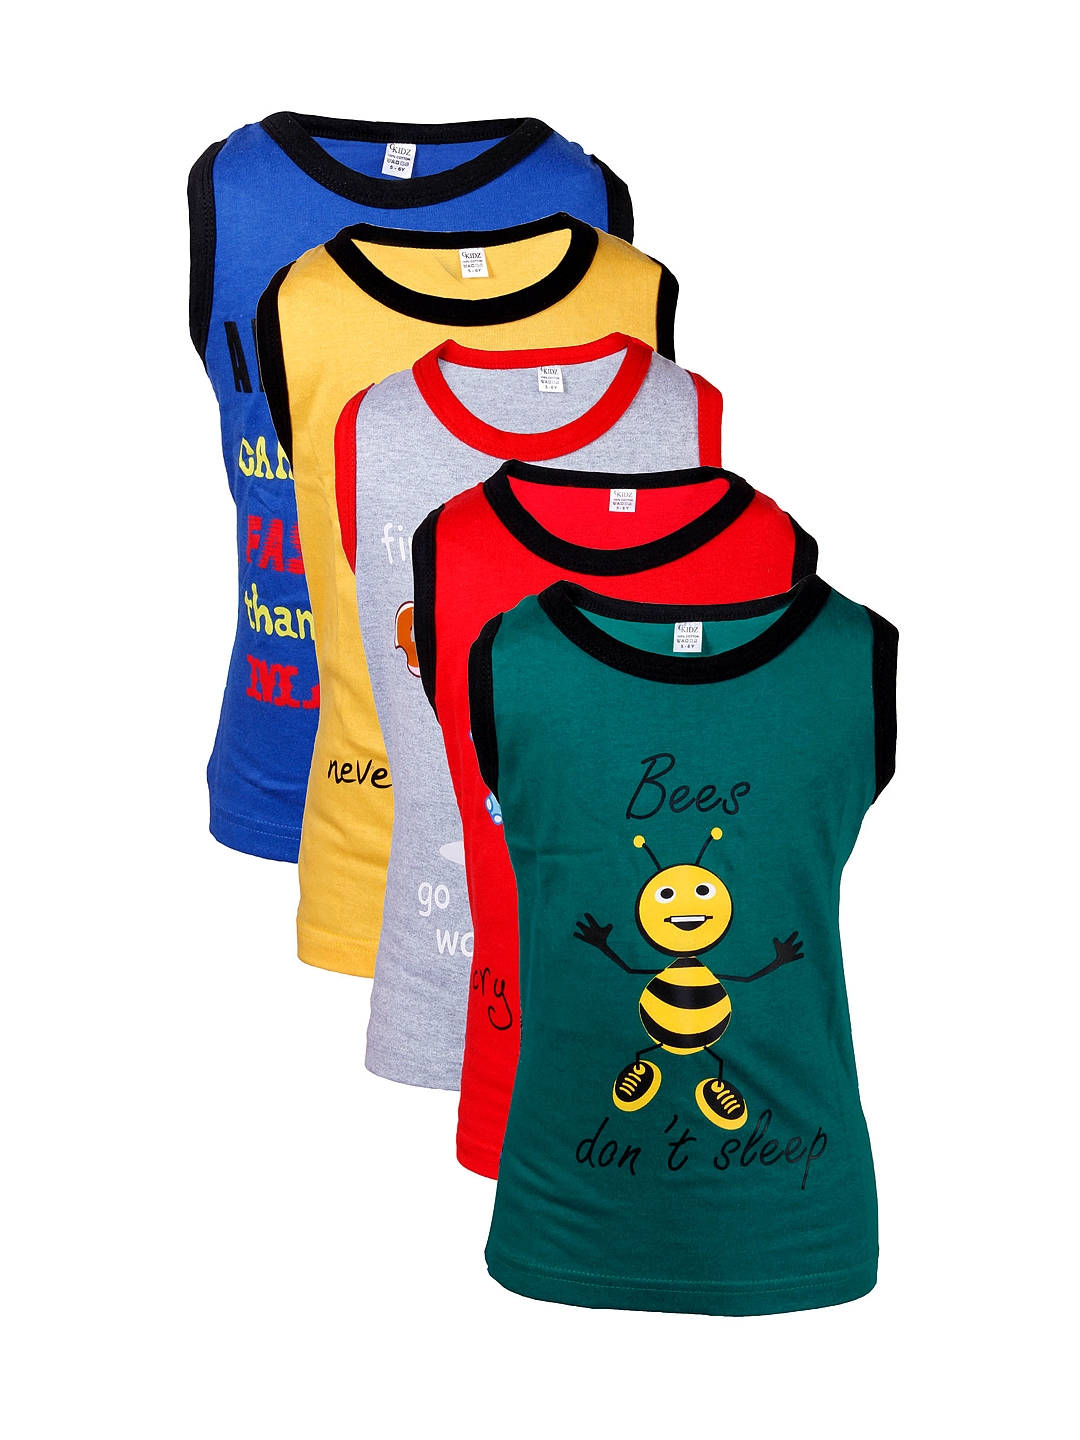 GKIDZ Boys Pack of 5 Printed Pure Cotton T shirts